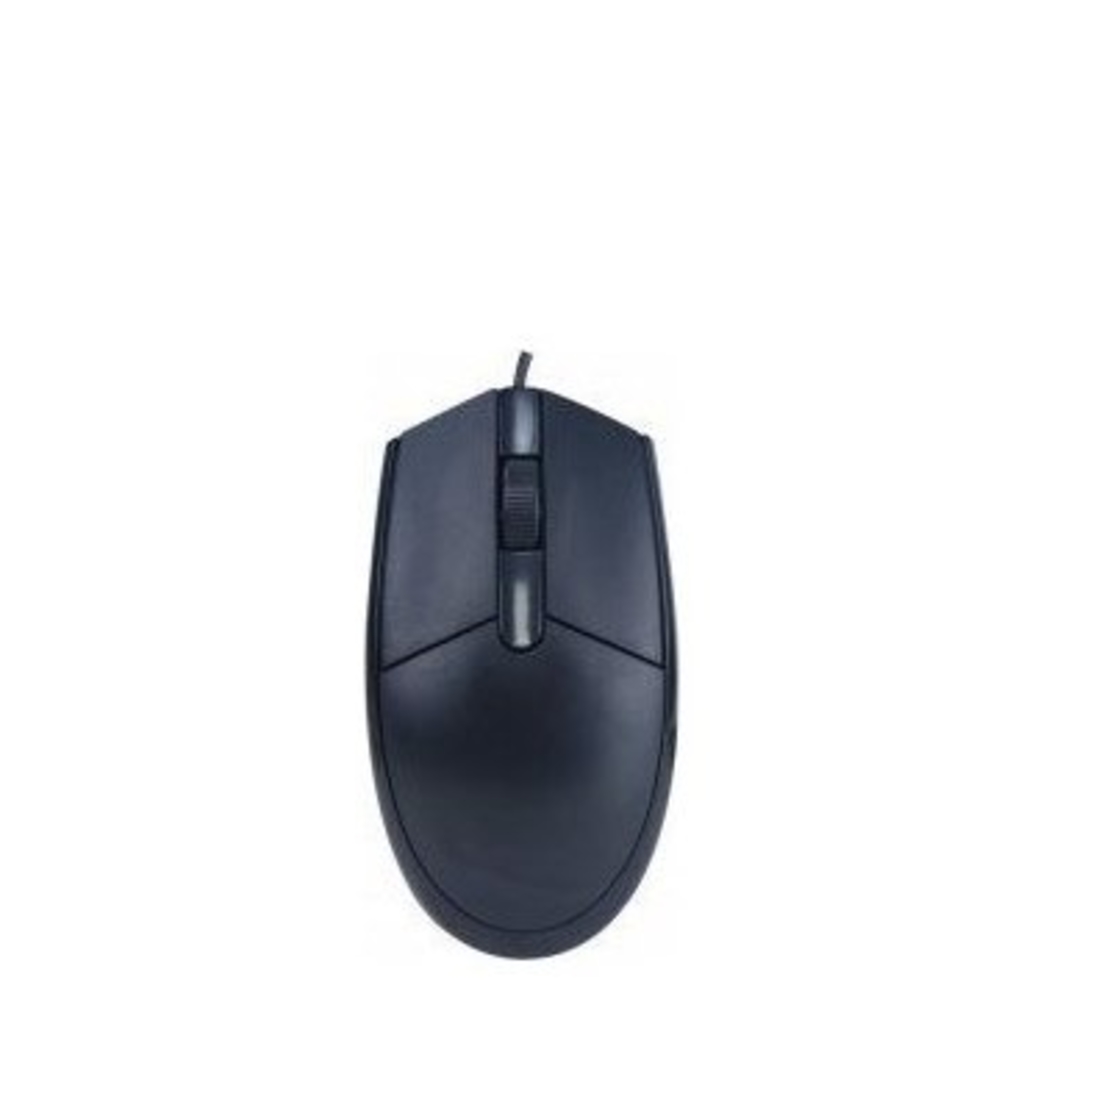 A high-quality mouse from Silver Line with a comfortable design and optical precision